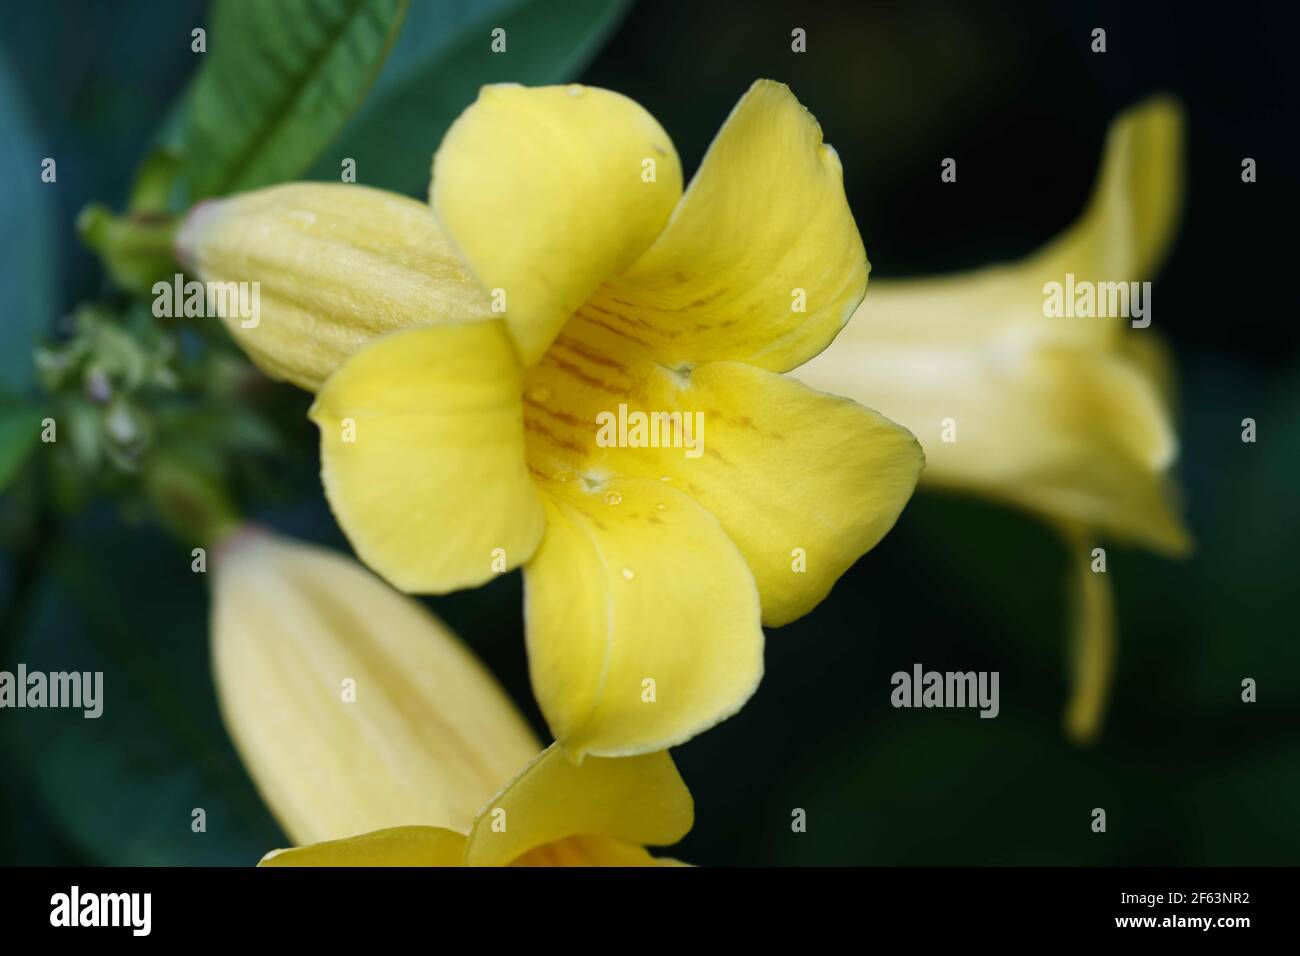 Native to Brazil, Bush Allamanda is an evergreen tropical shrub. It typically grows to 5 ft tall. It bears clusters of yellow, trumpet- shaped flowers. Stock Photo